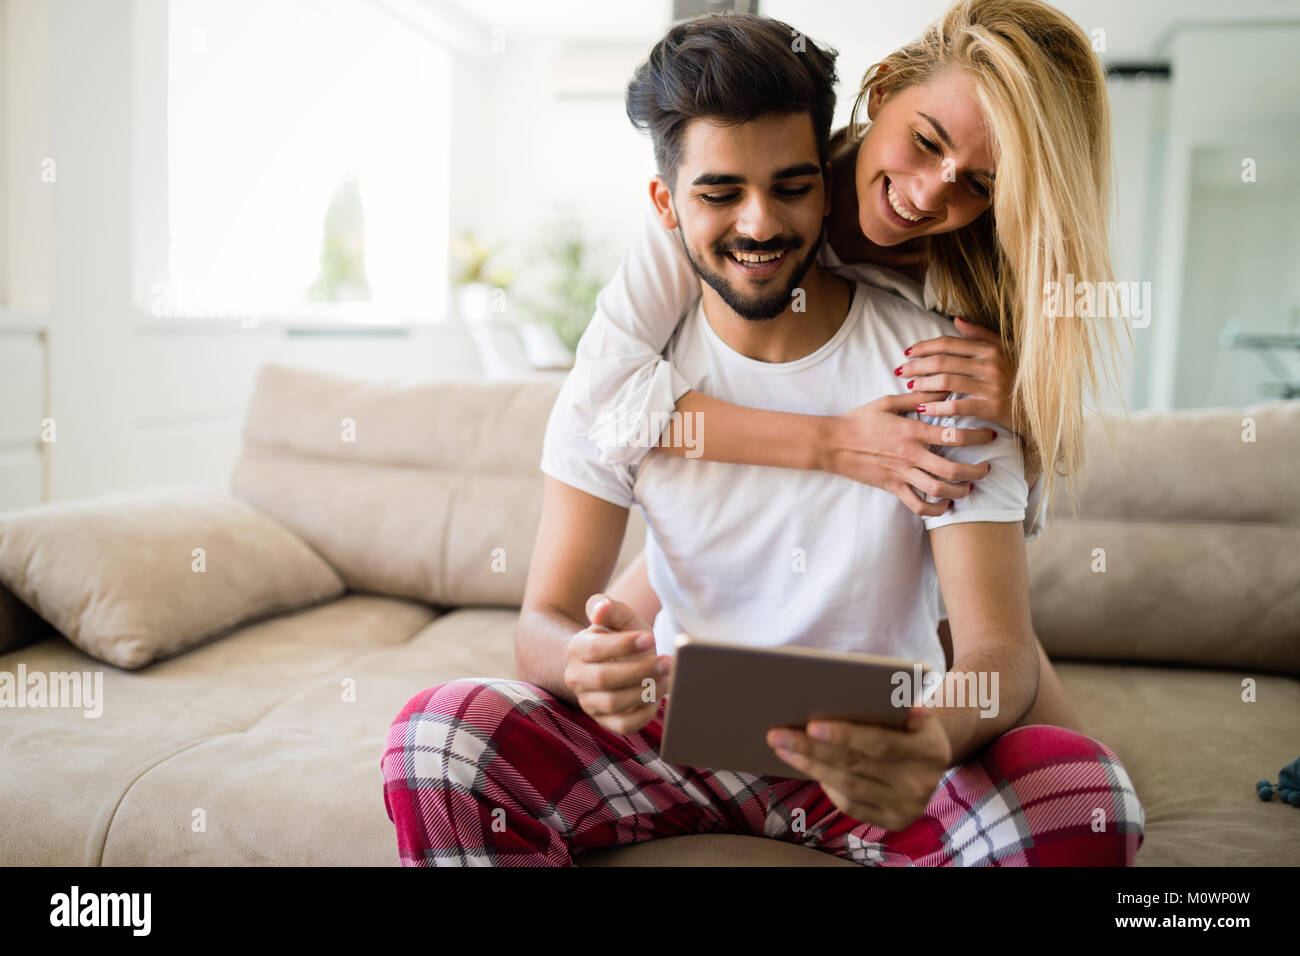 Happy couple in love using tablet in pajamas Stock Photo